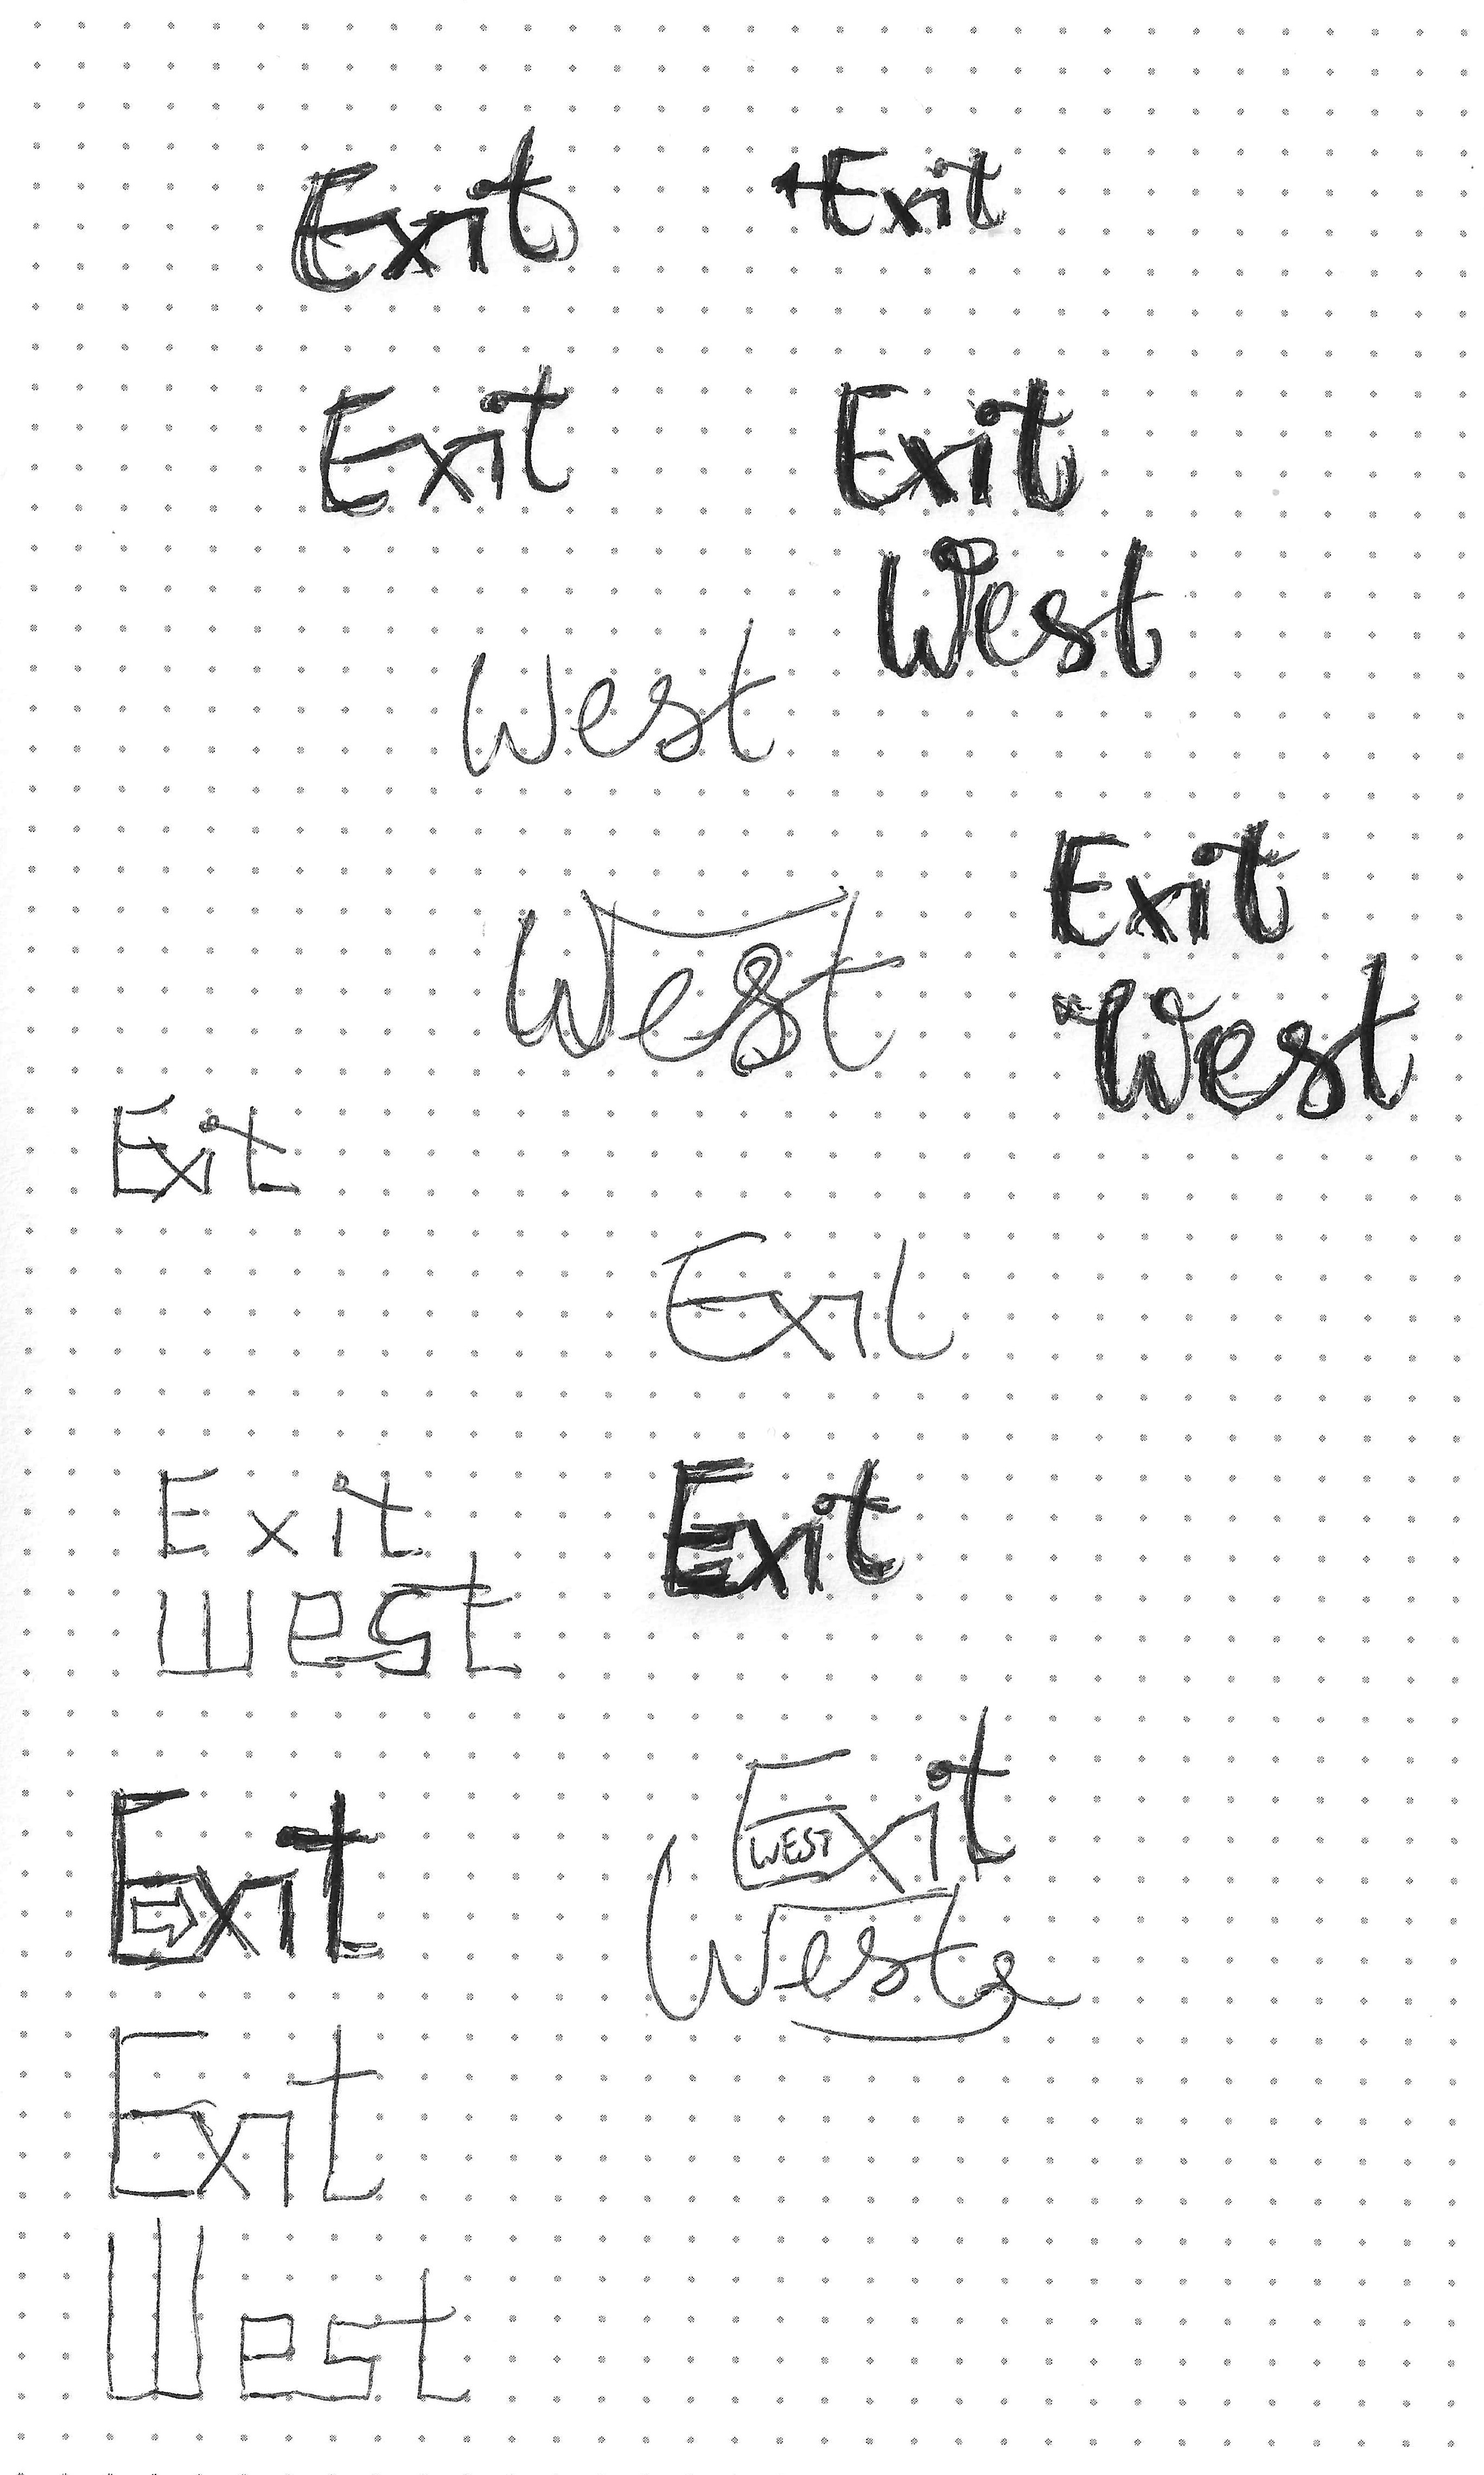 exitwest sketches